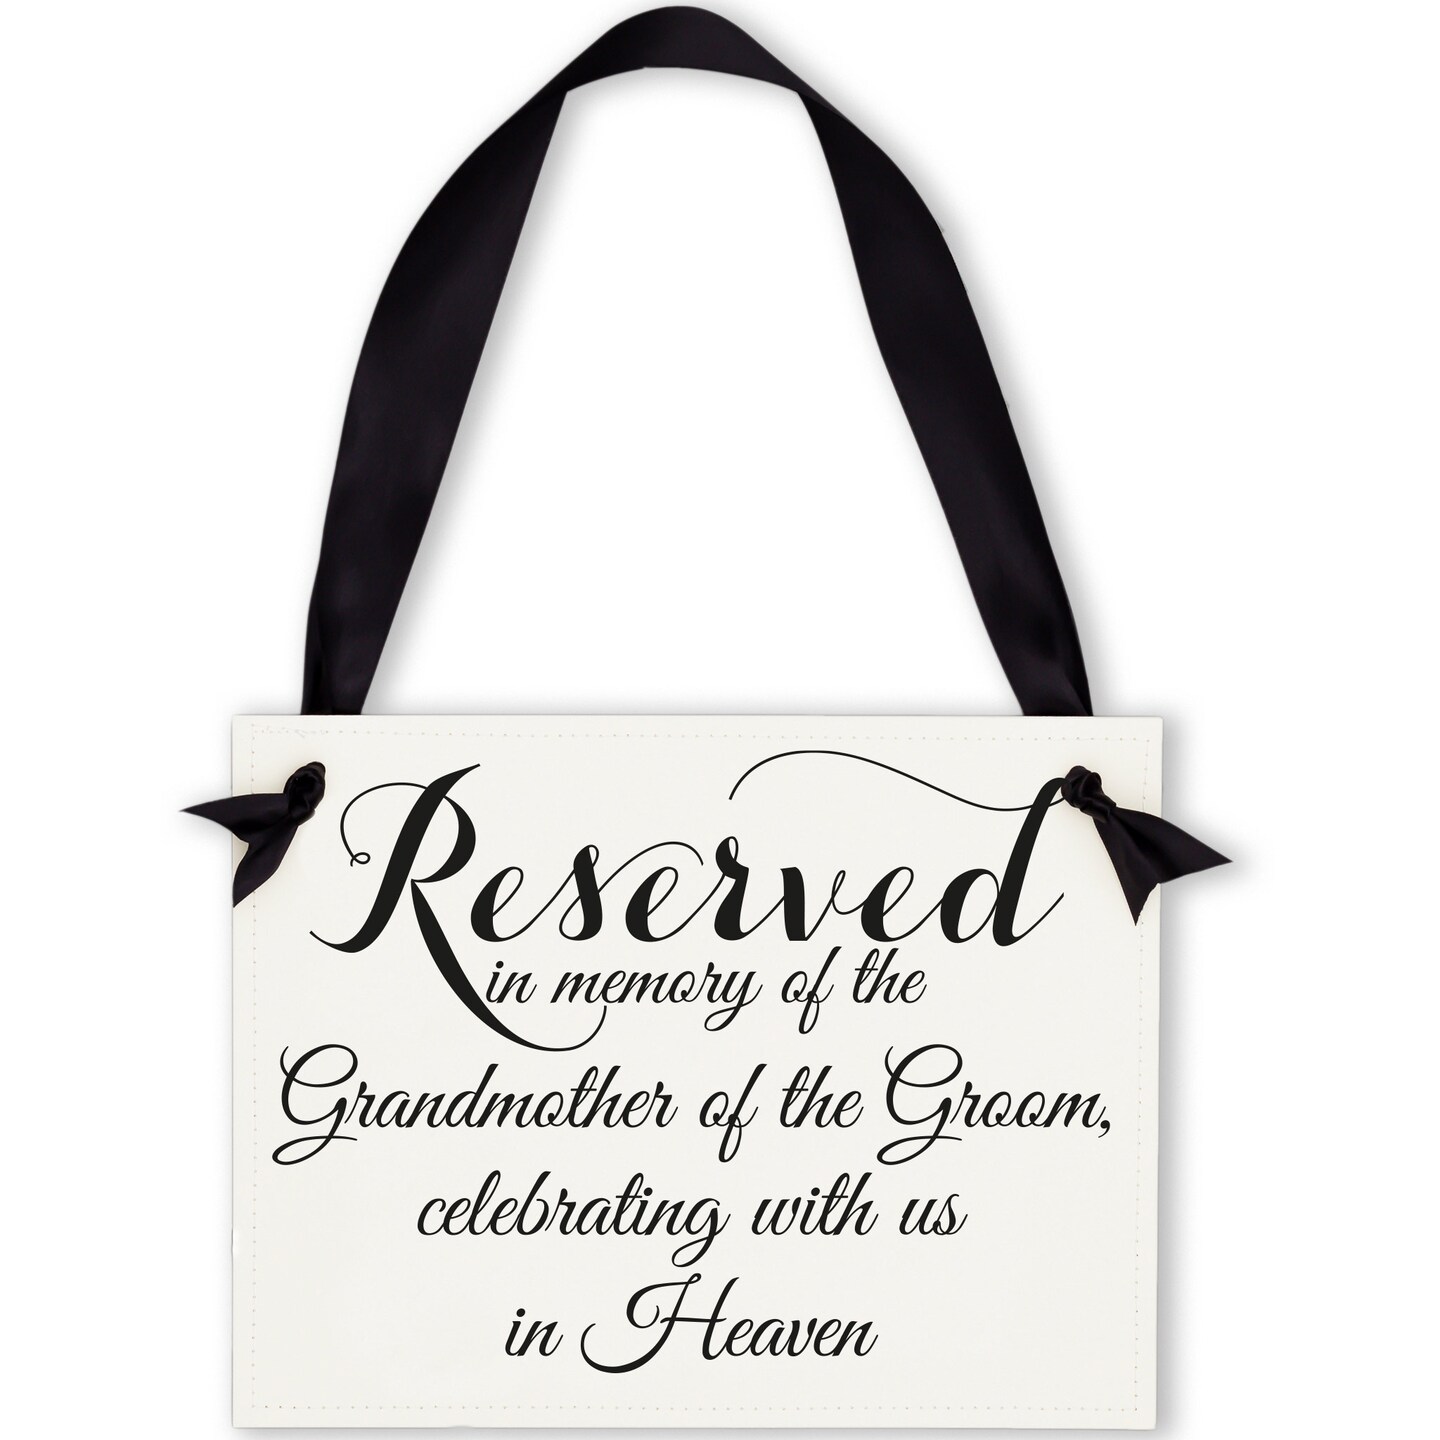 Ritzy Rose Grandmother of the Groom Memorial Sign - Black on 11x8in White Linen Cardstock with Black Ribbon